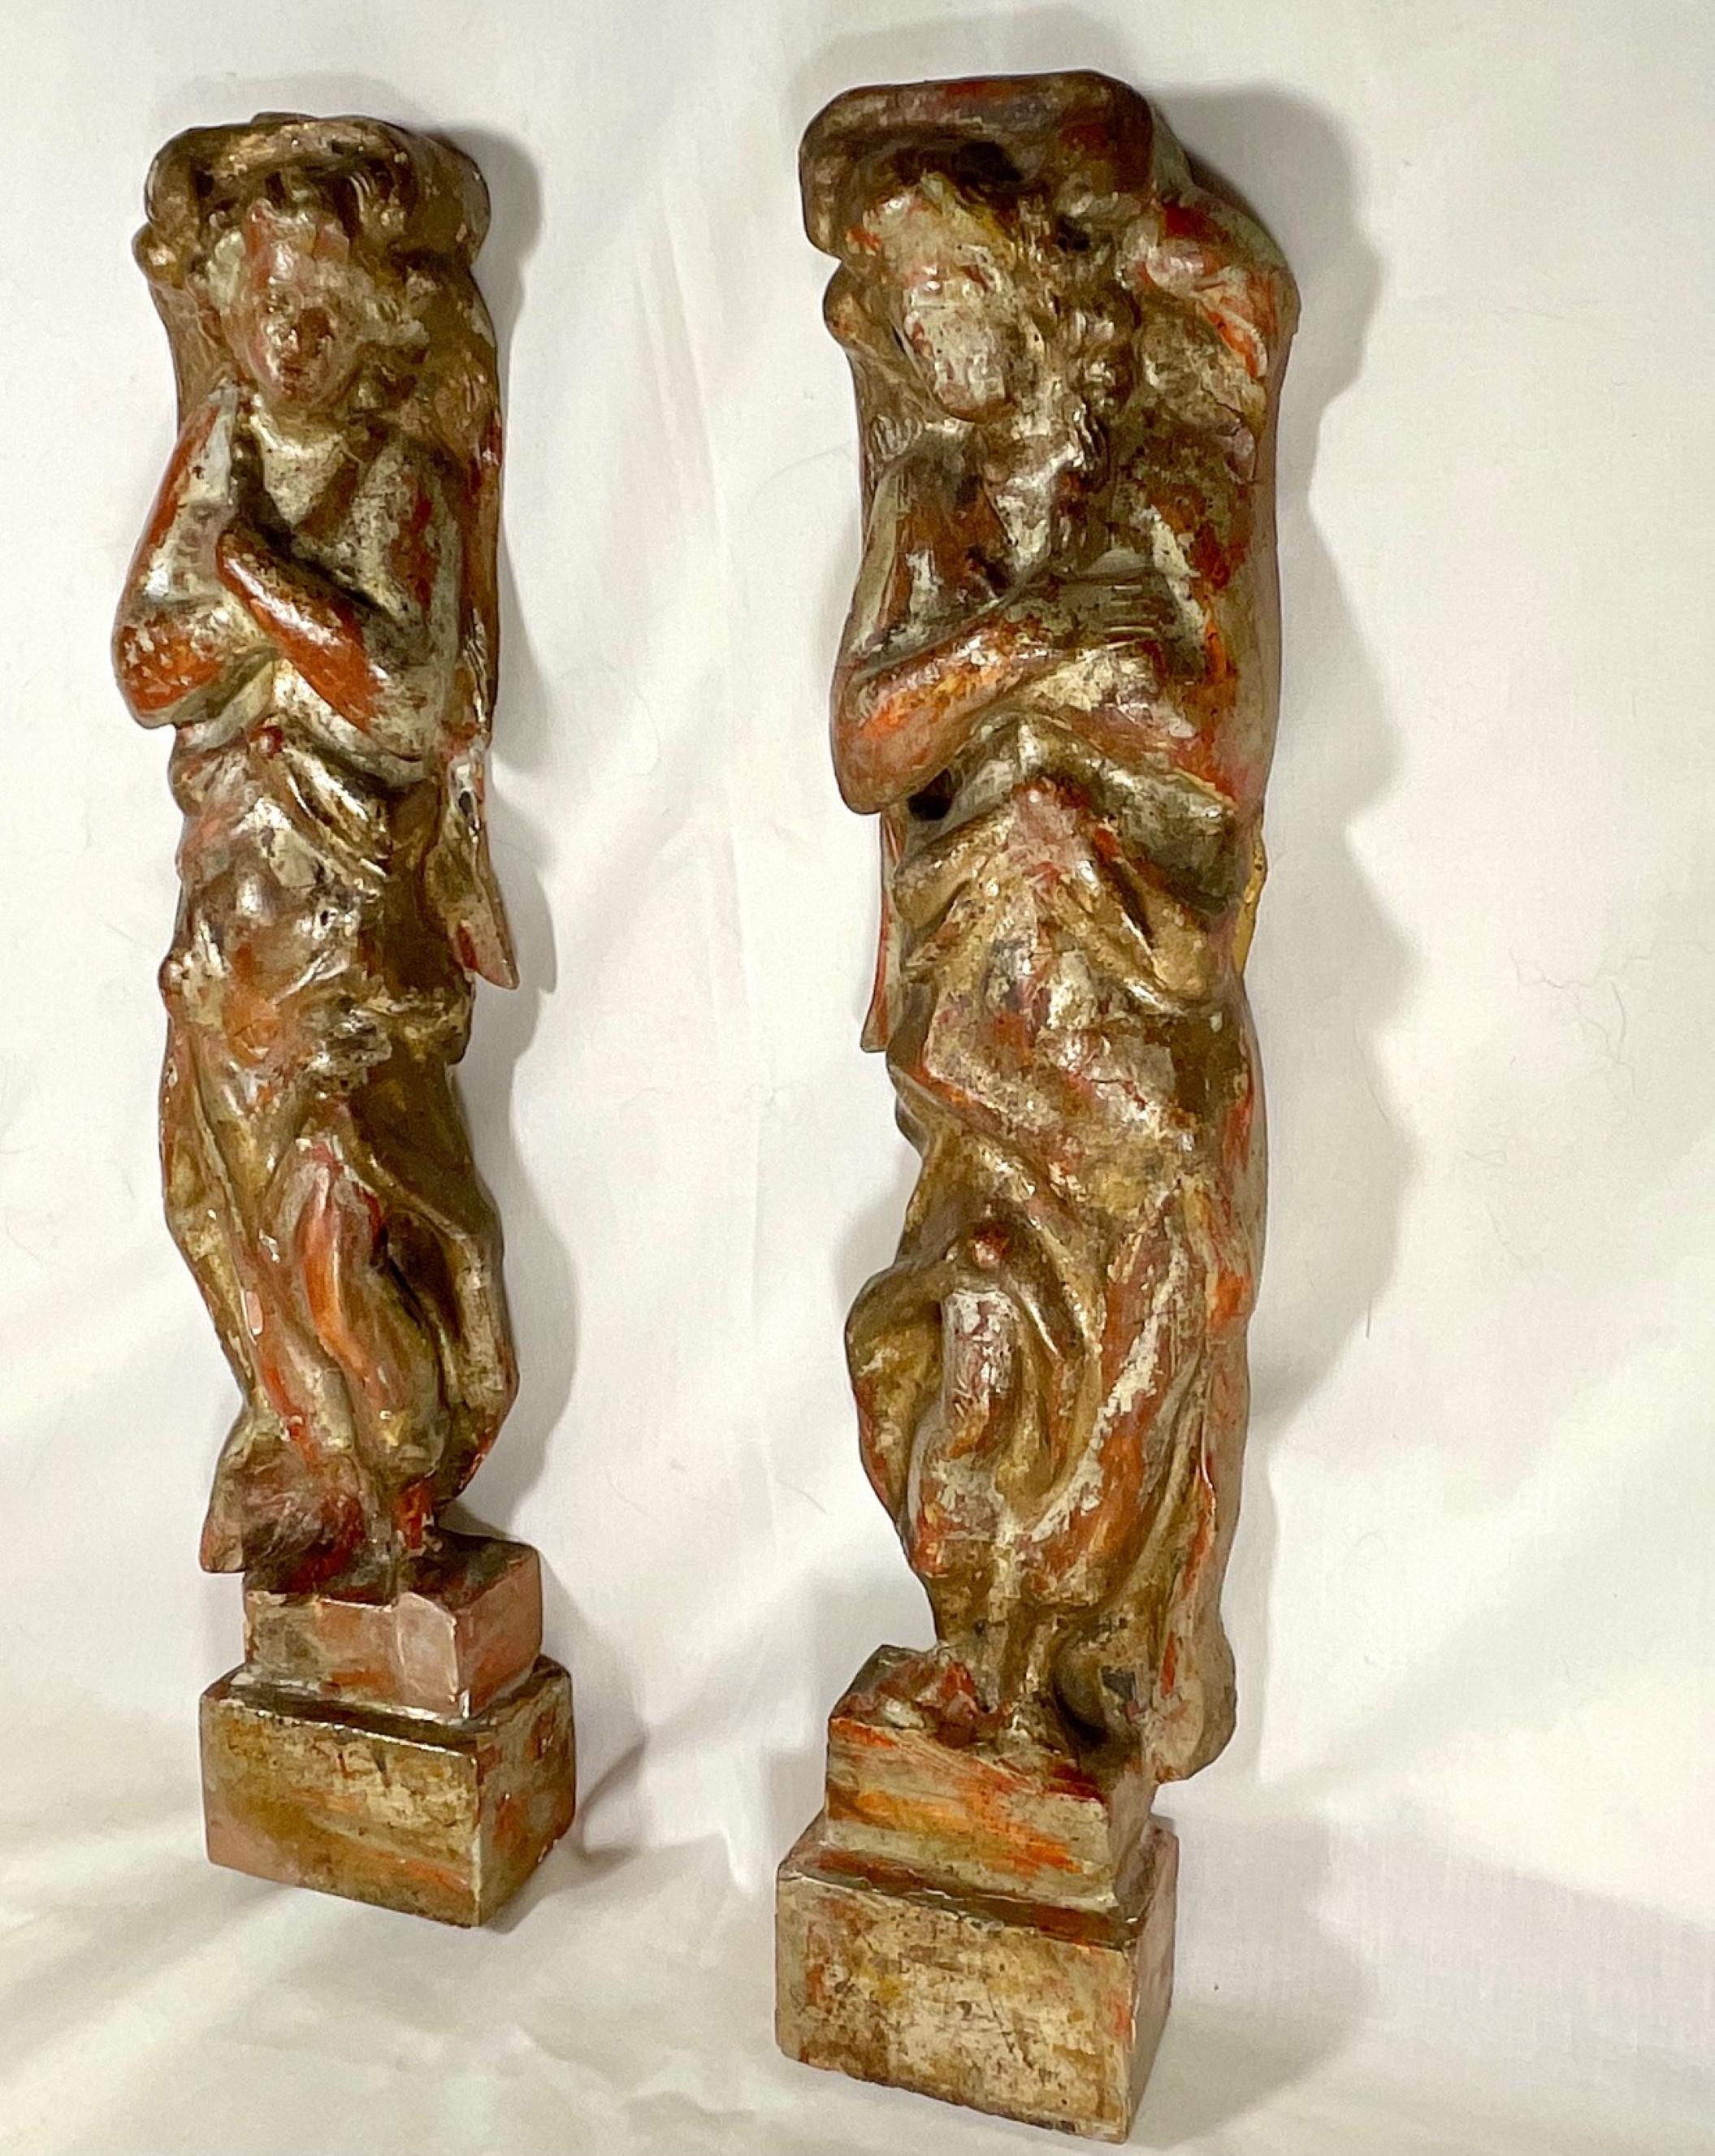 18th century Italian Baroque carved and polychrome flanking Angels.

A stunning pair of 18th century hand carved and polychrome angels of Italian origin. These two beautiful holy flanking angels are a true pair. They once adorned a sculptural center